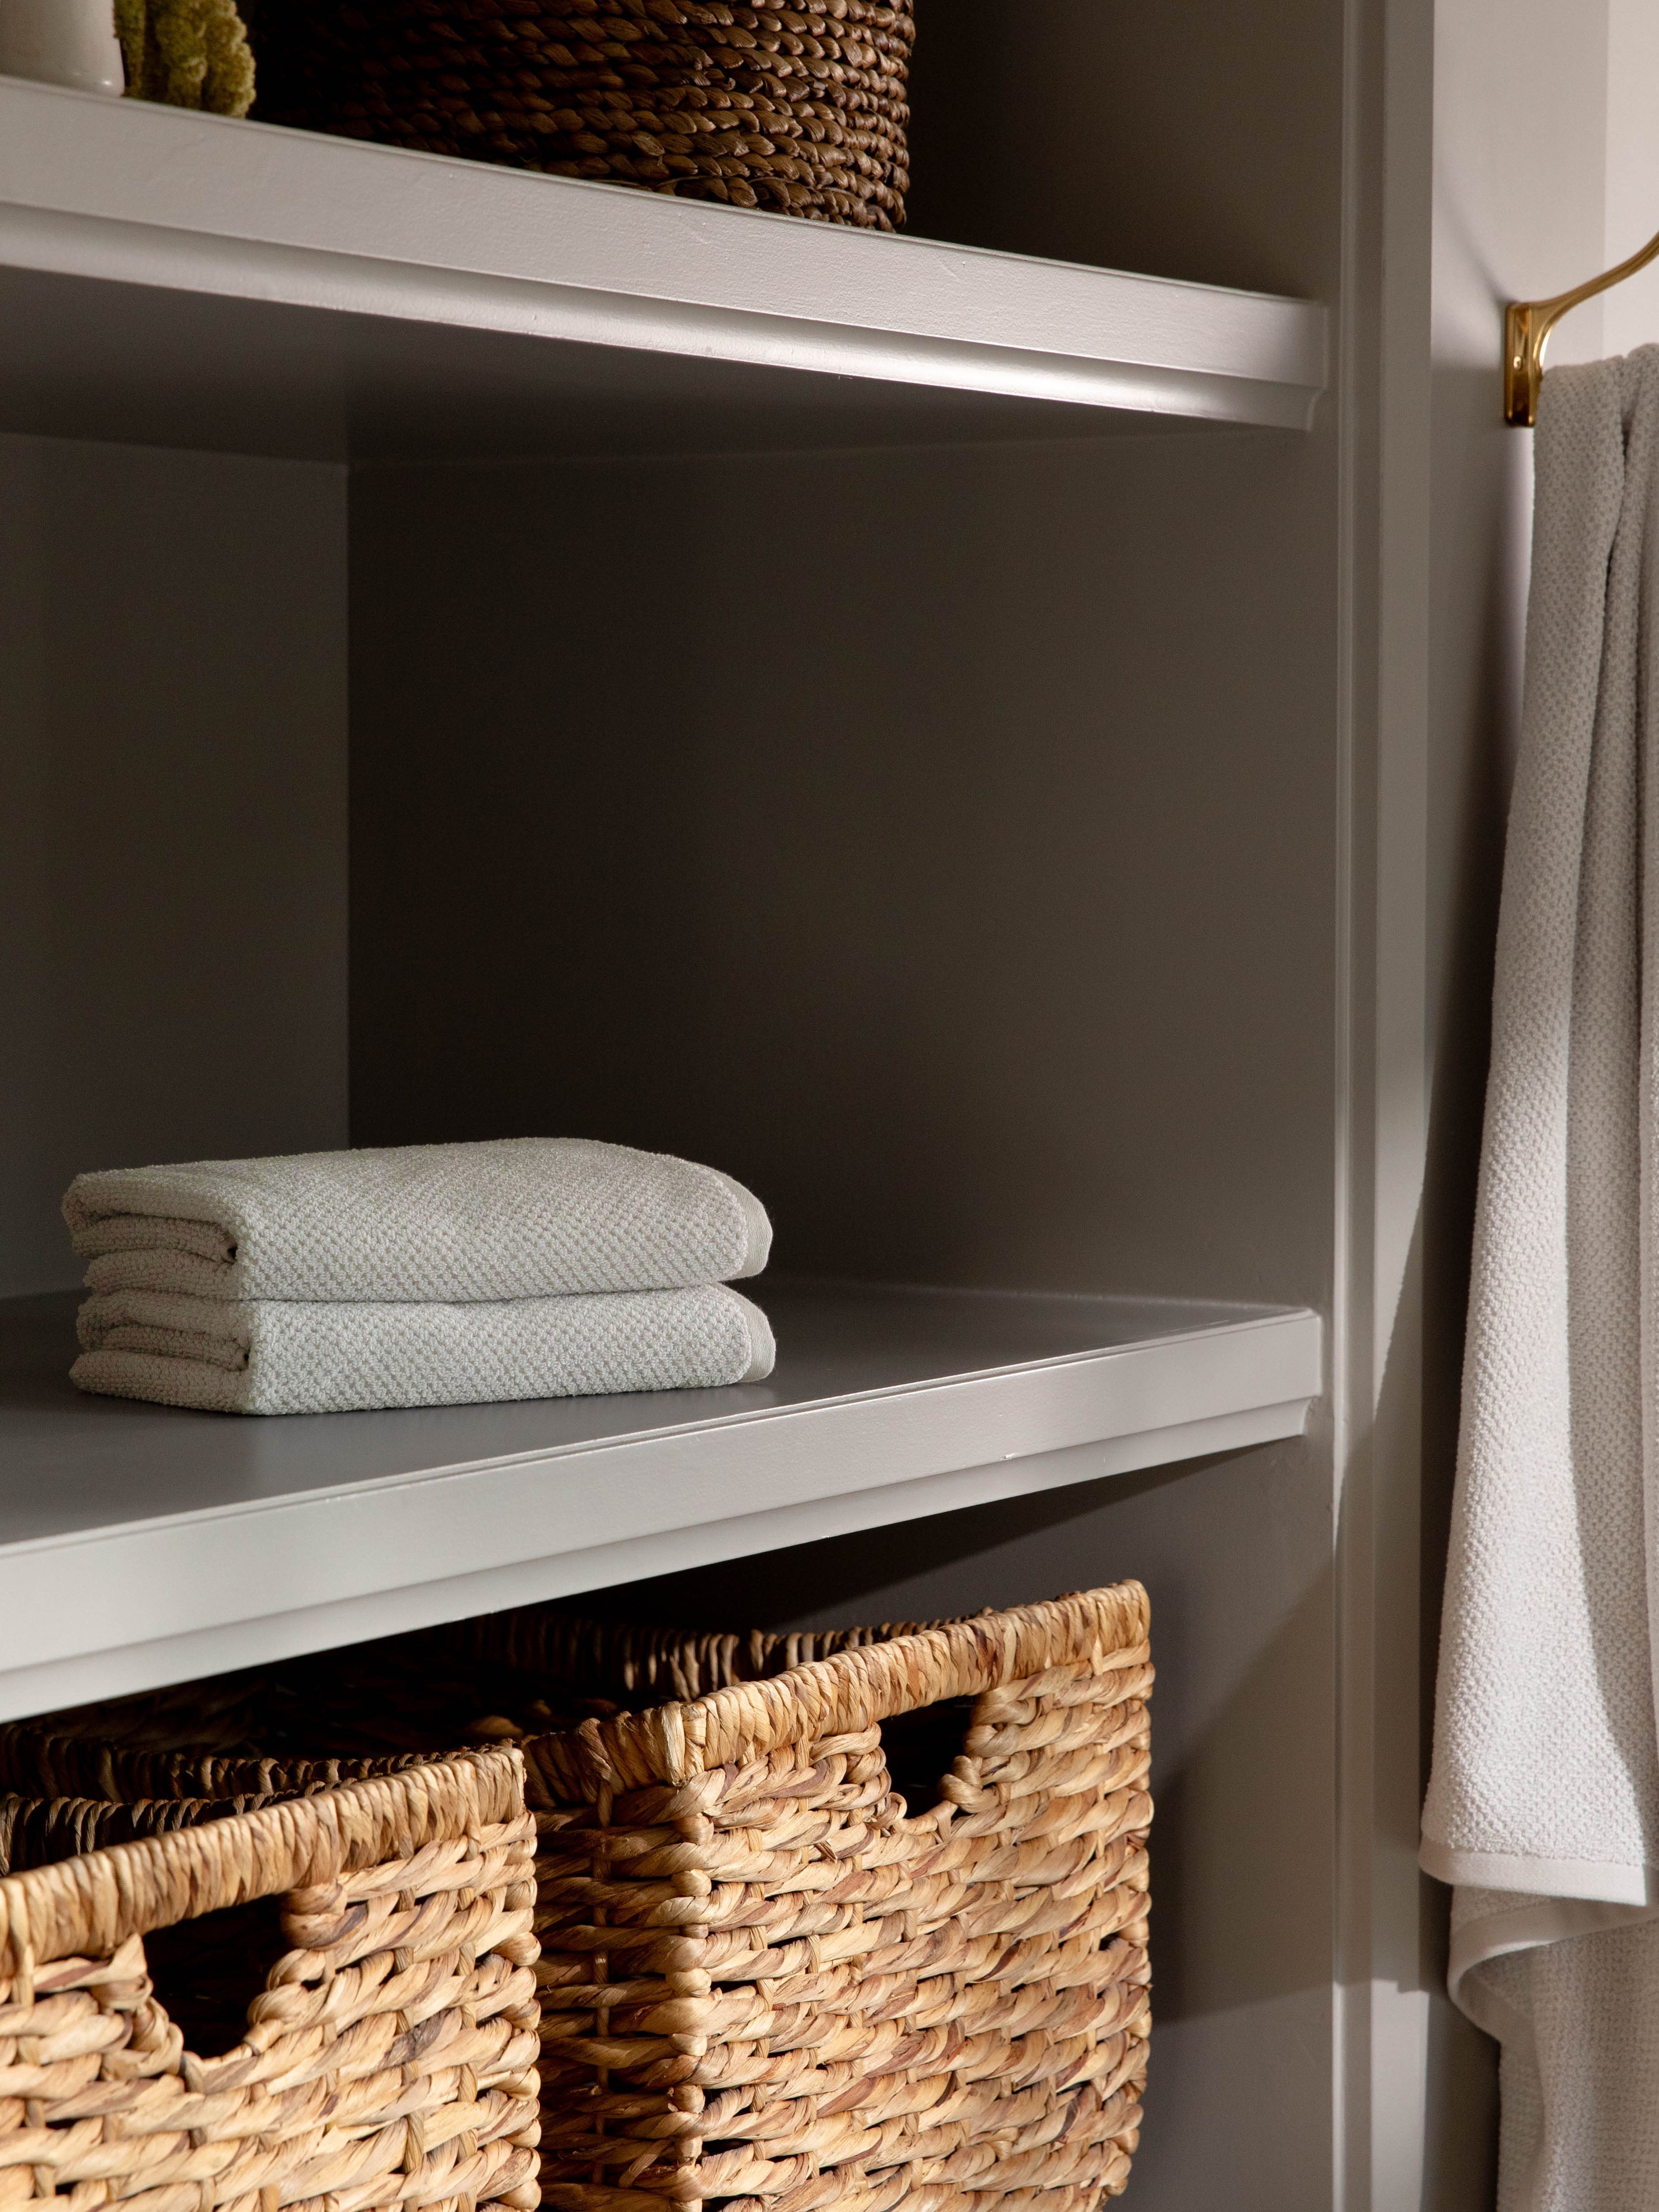 Nantucket Hand Towels in the color Heathered Light Grey. Photo of Nantucket Hand Towels taken with the hand towels resting on a shelf in a bathroom. |Color: Heathered Light Grey